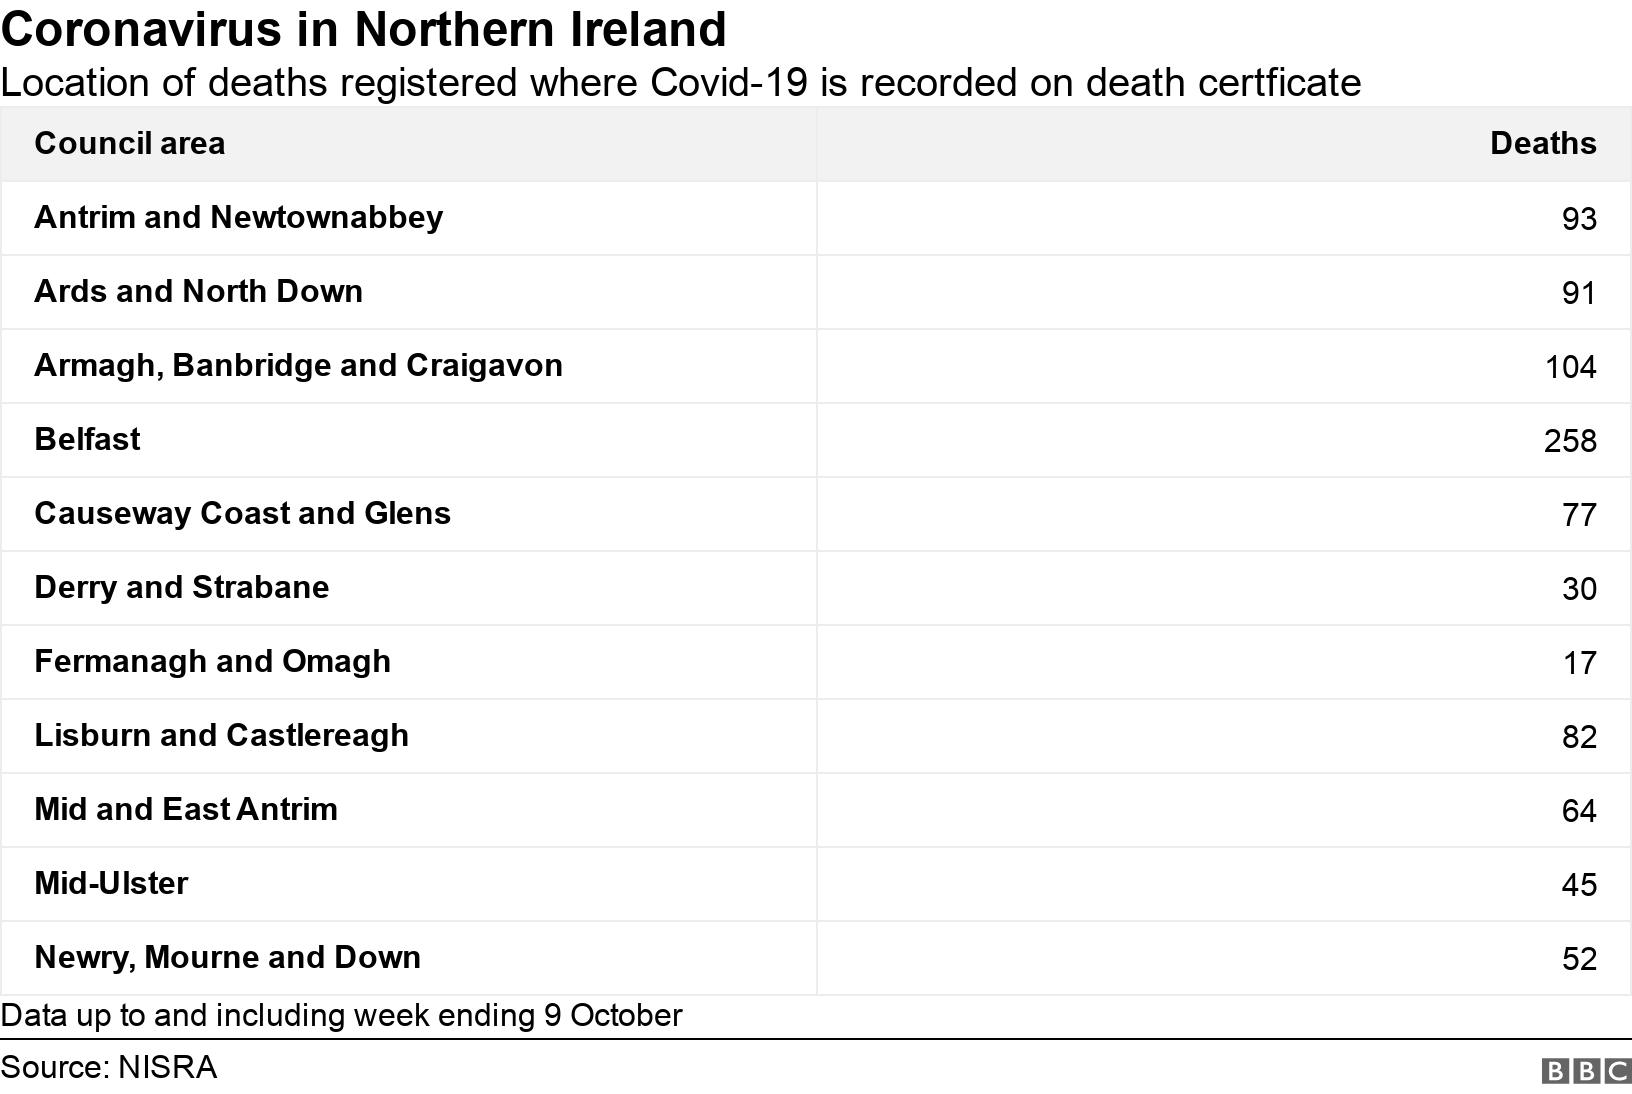 Coronavirus in Northern Ireland. Location of deaths registered where Covid-19 is recorded on death certficate. Data up to and including week ending 9 October.